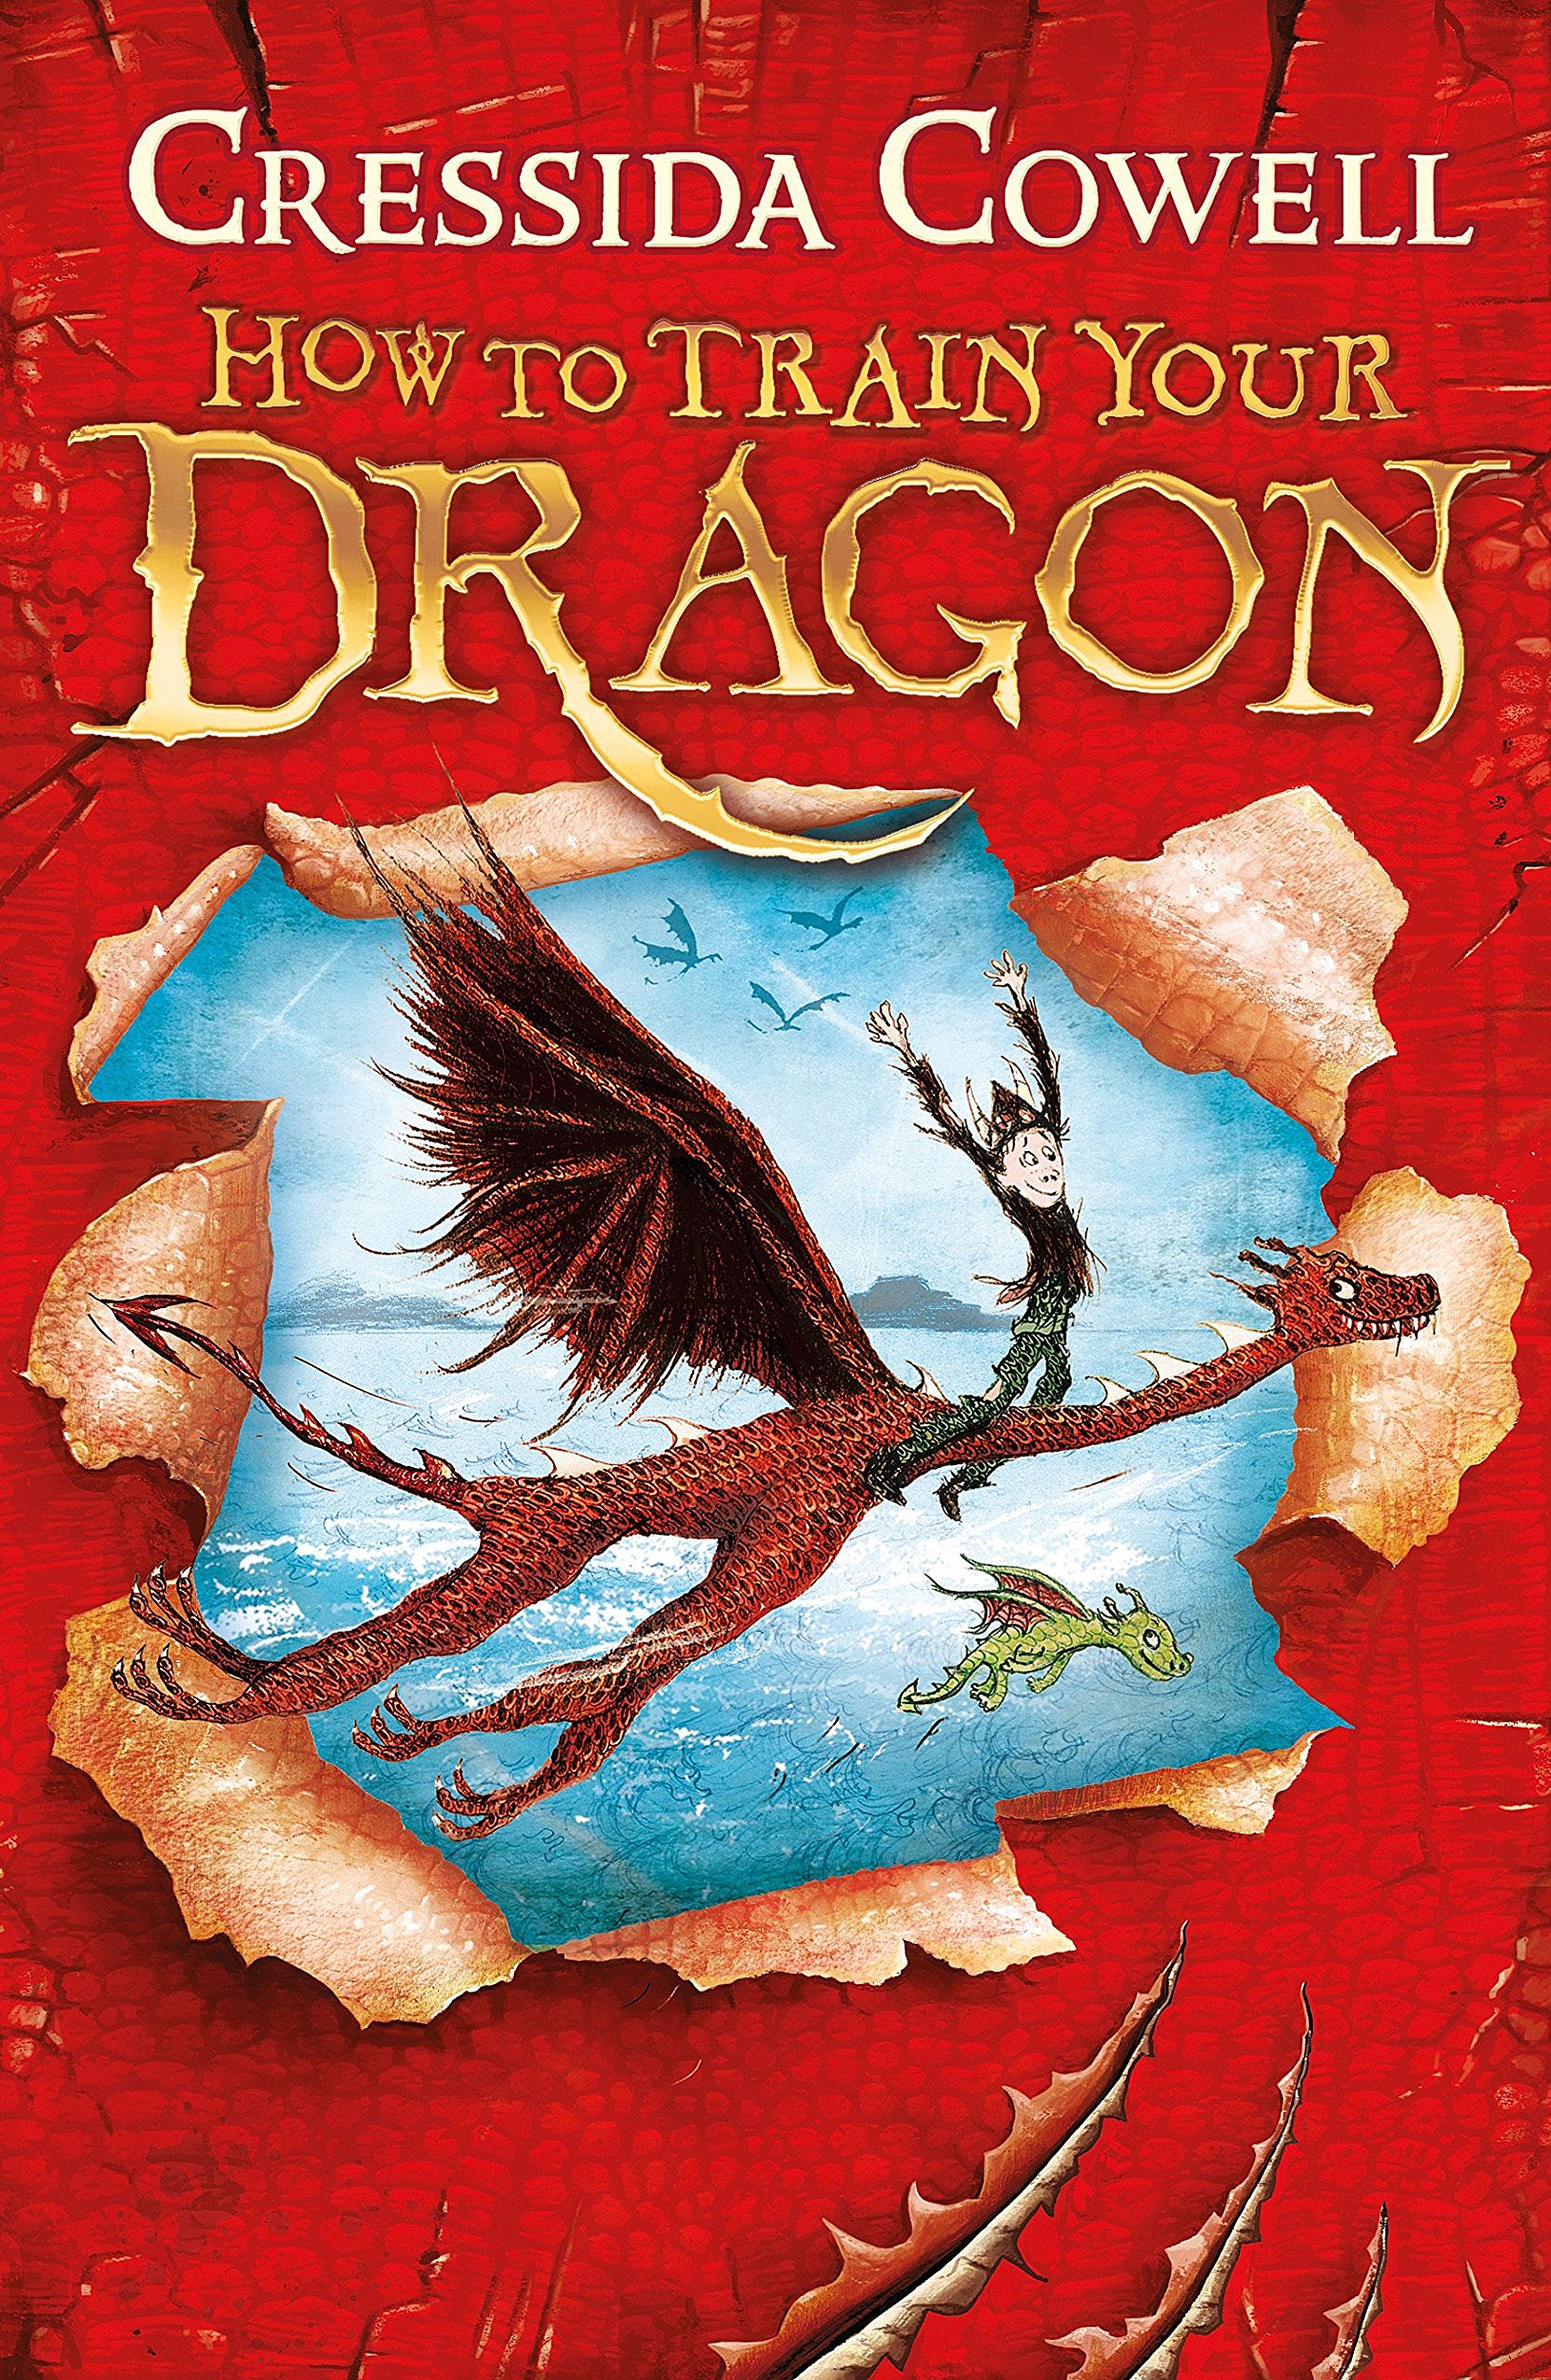 Cover: “How to Train Your Dragon” series by Cressida Cowell .